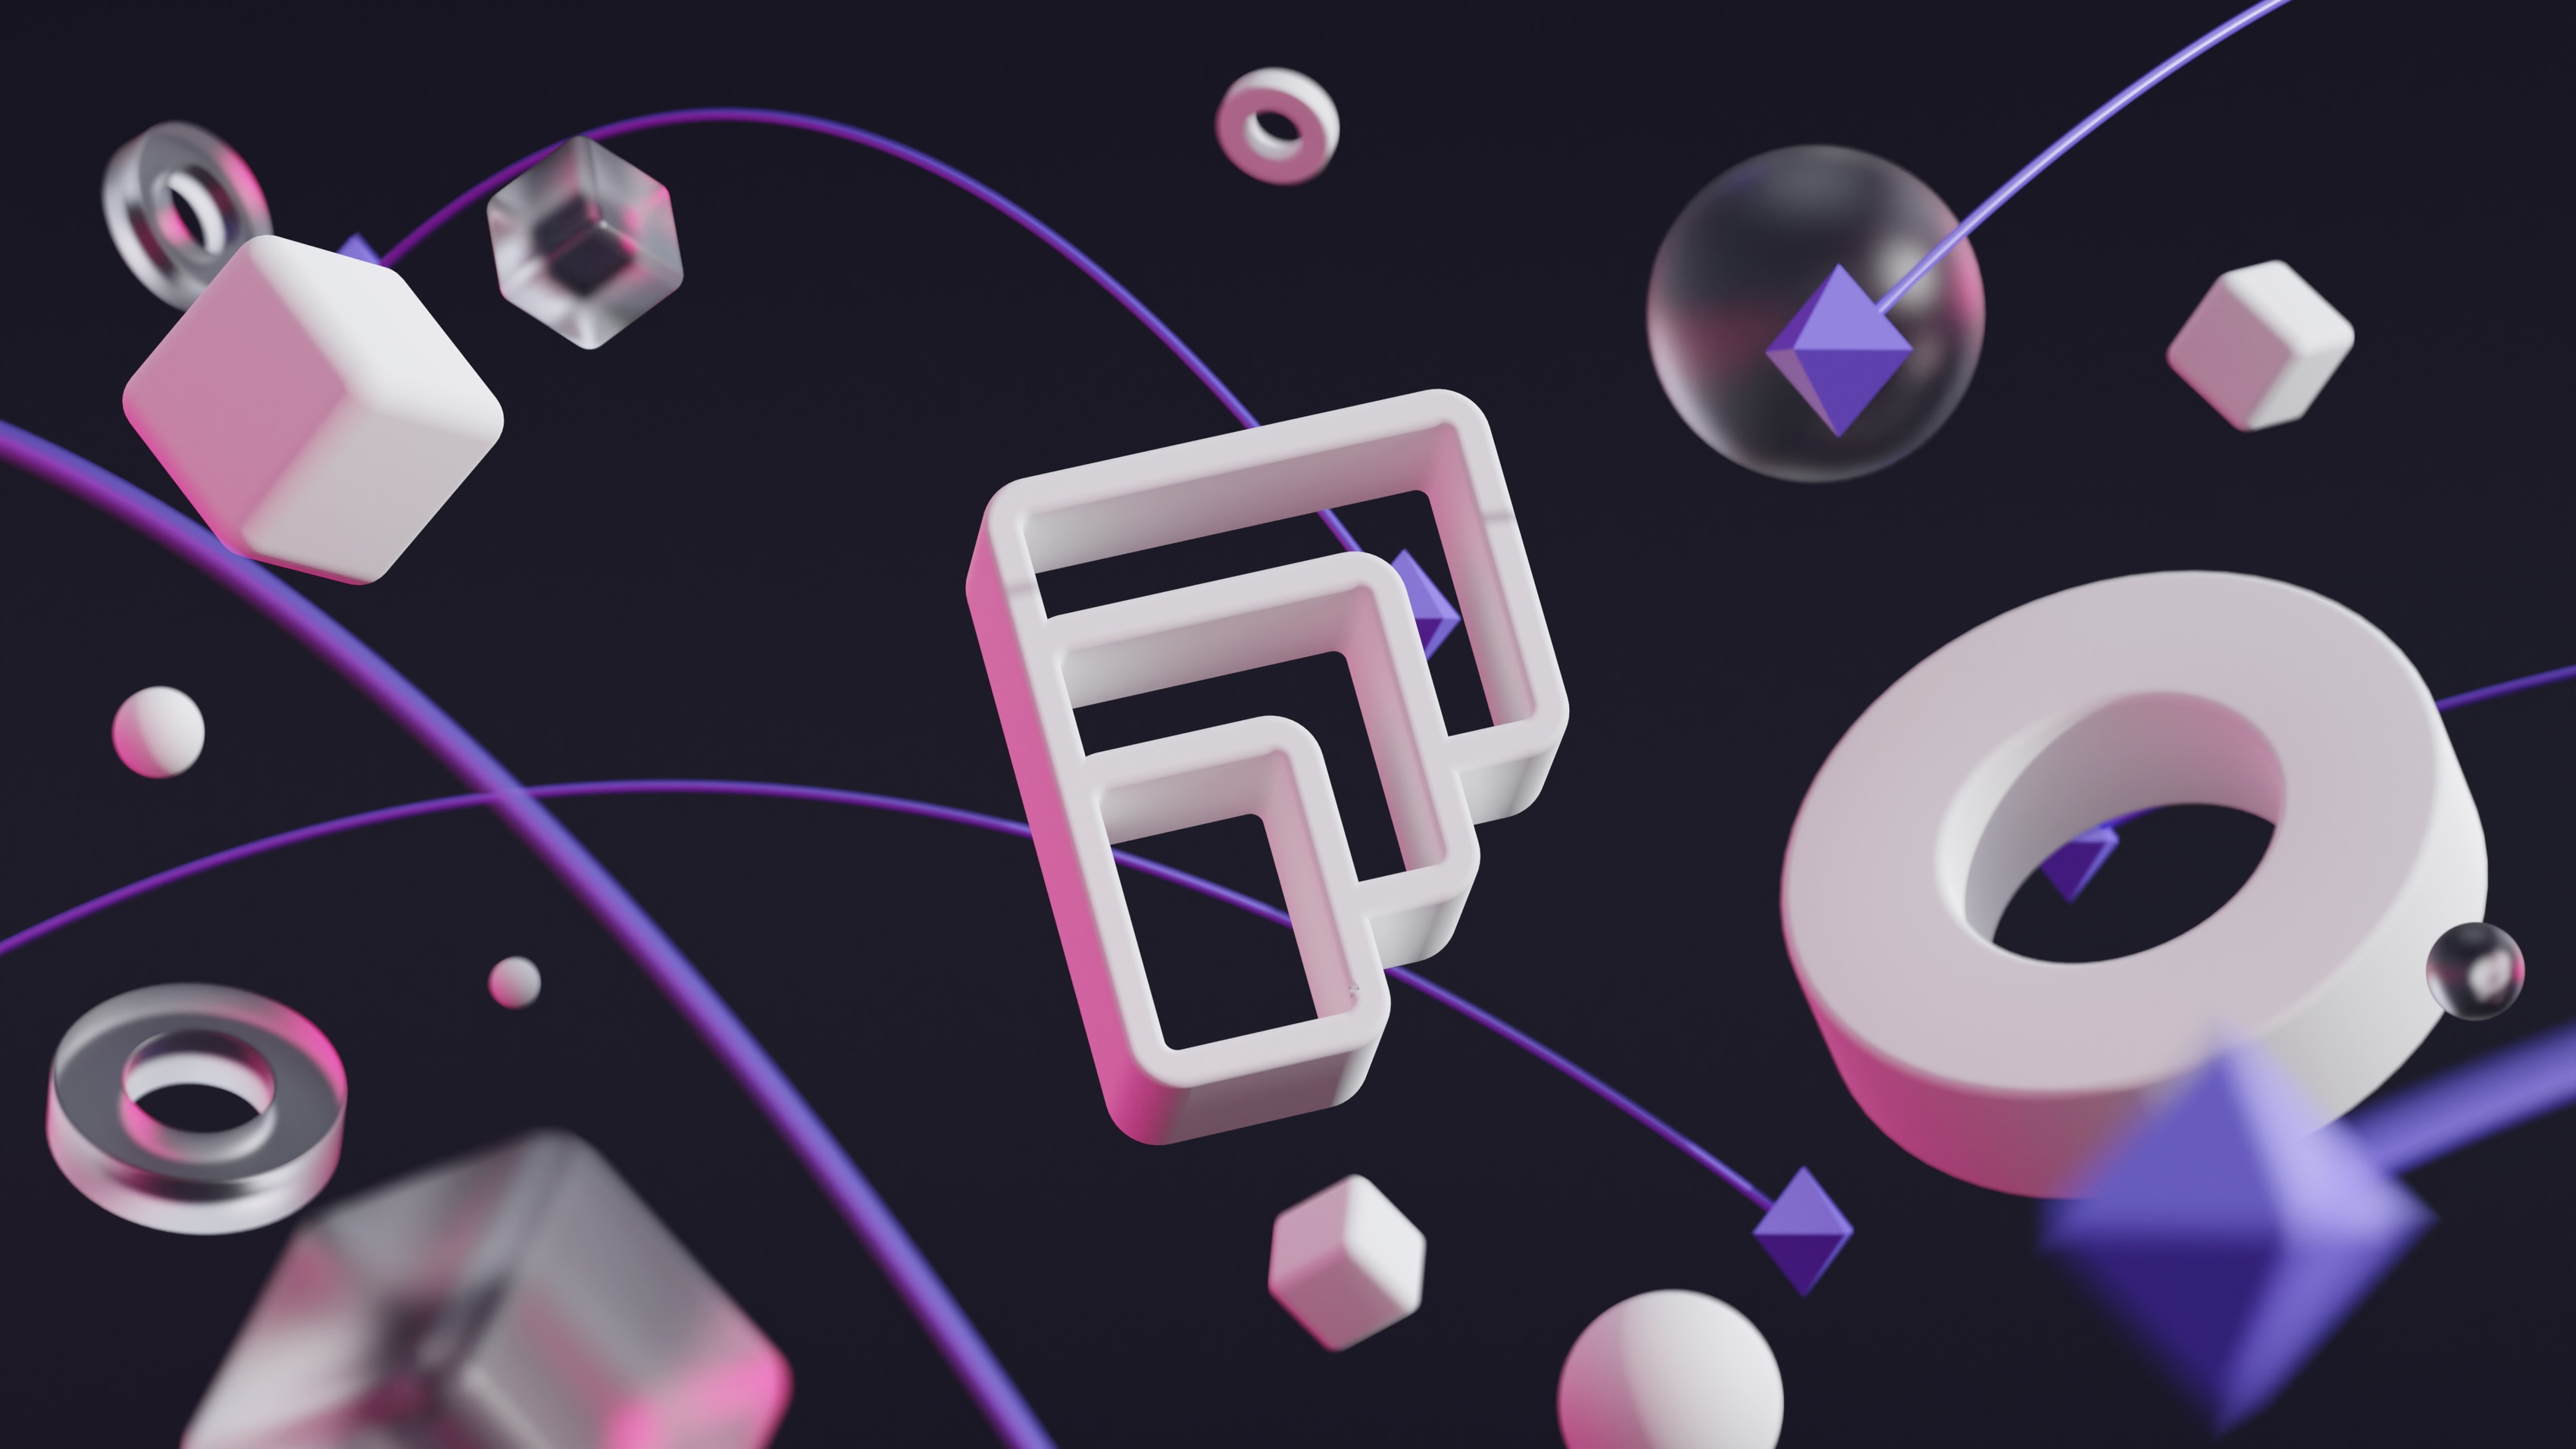 3D rendering of the Fable "F" logo, with other 3D shapes floating around it on a purple backdrop